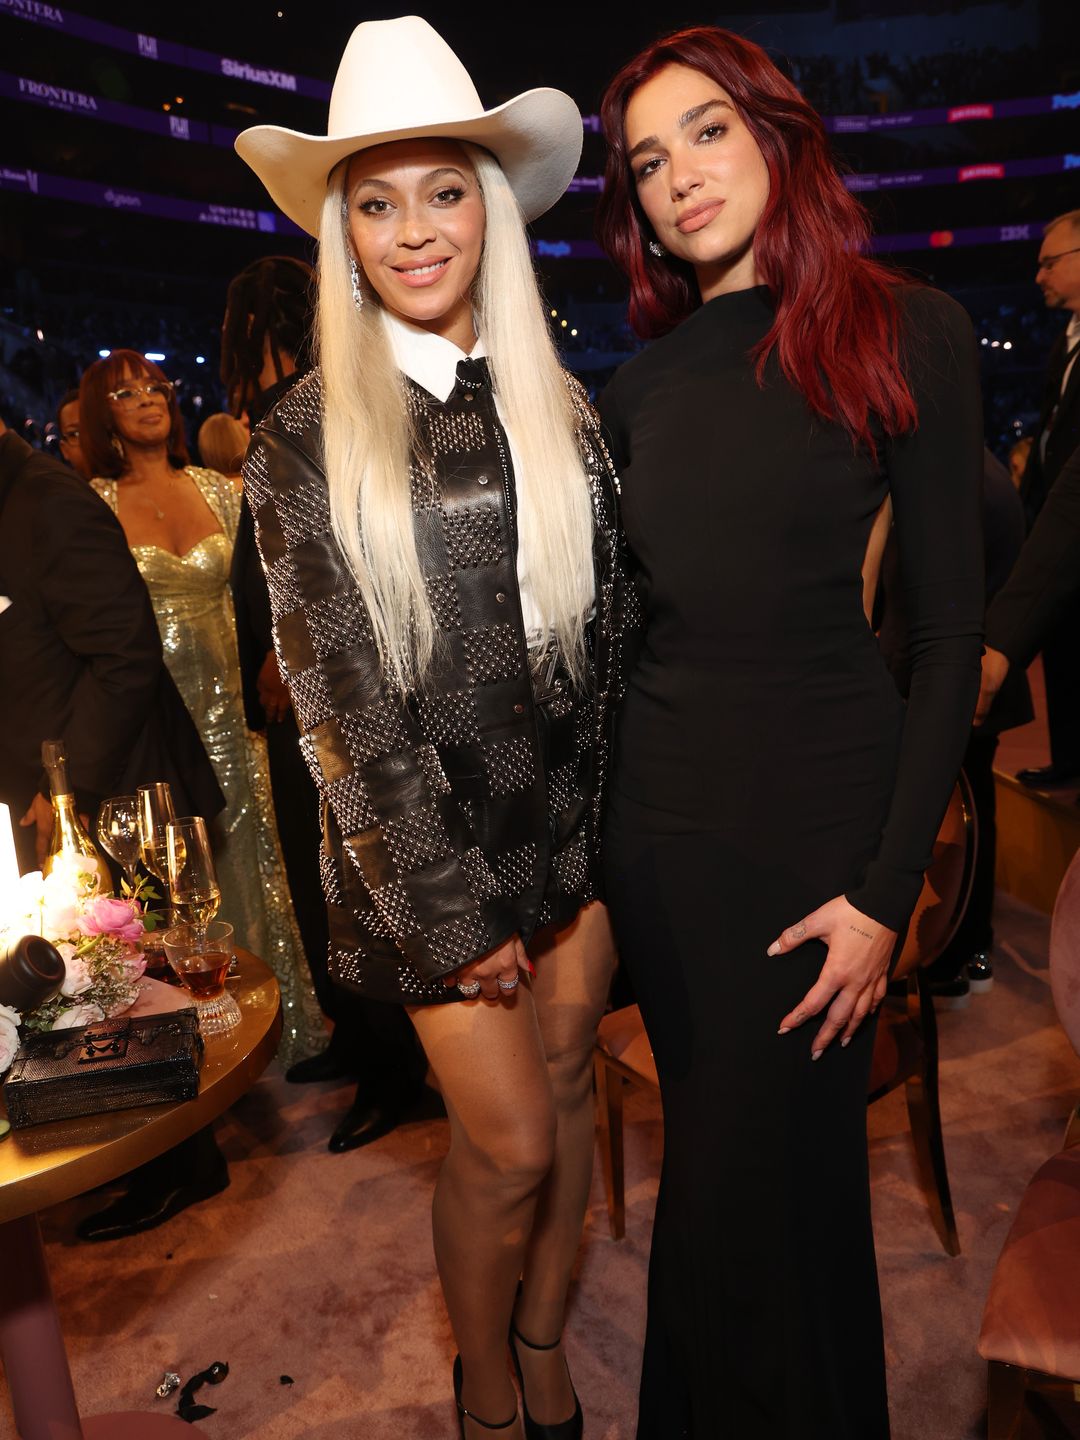 Dua Lipa poses with Beyonce at the 66th GRAMMY Awards. Dua wears a black gown while Beyonce wears a Louis Vuitton blazer dress and cowboy hat